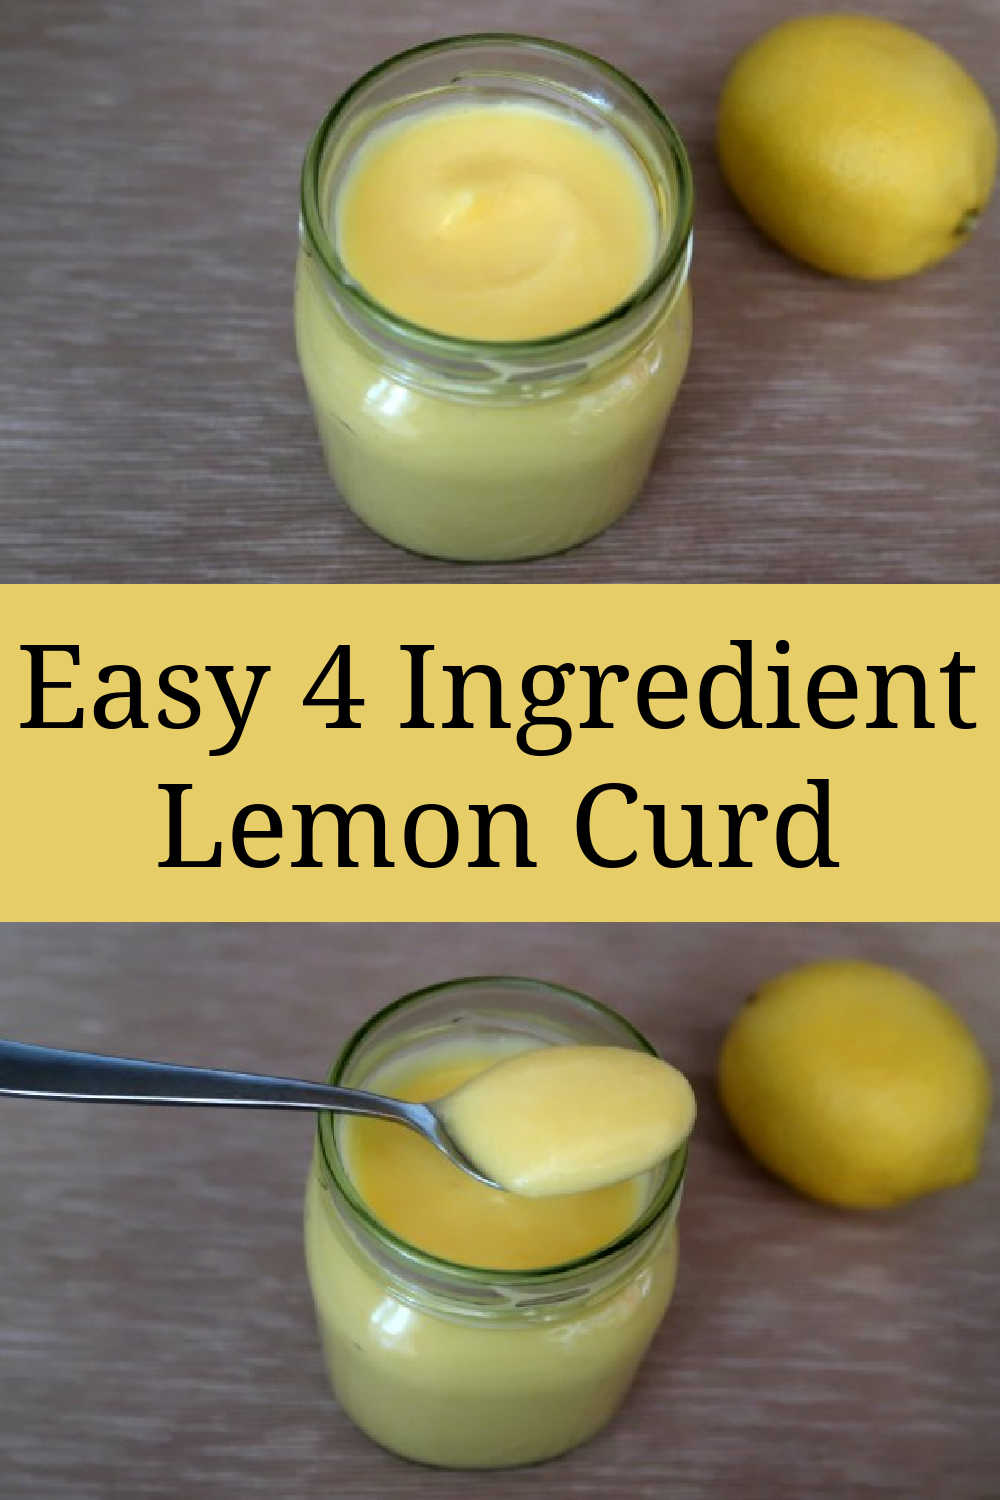 Easy Lemon Curd Recipe - How to make a quick and simple homemade 4 ingredient lemon curd dessert. With the video.